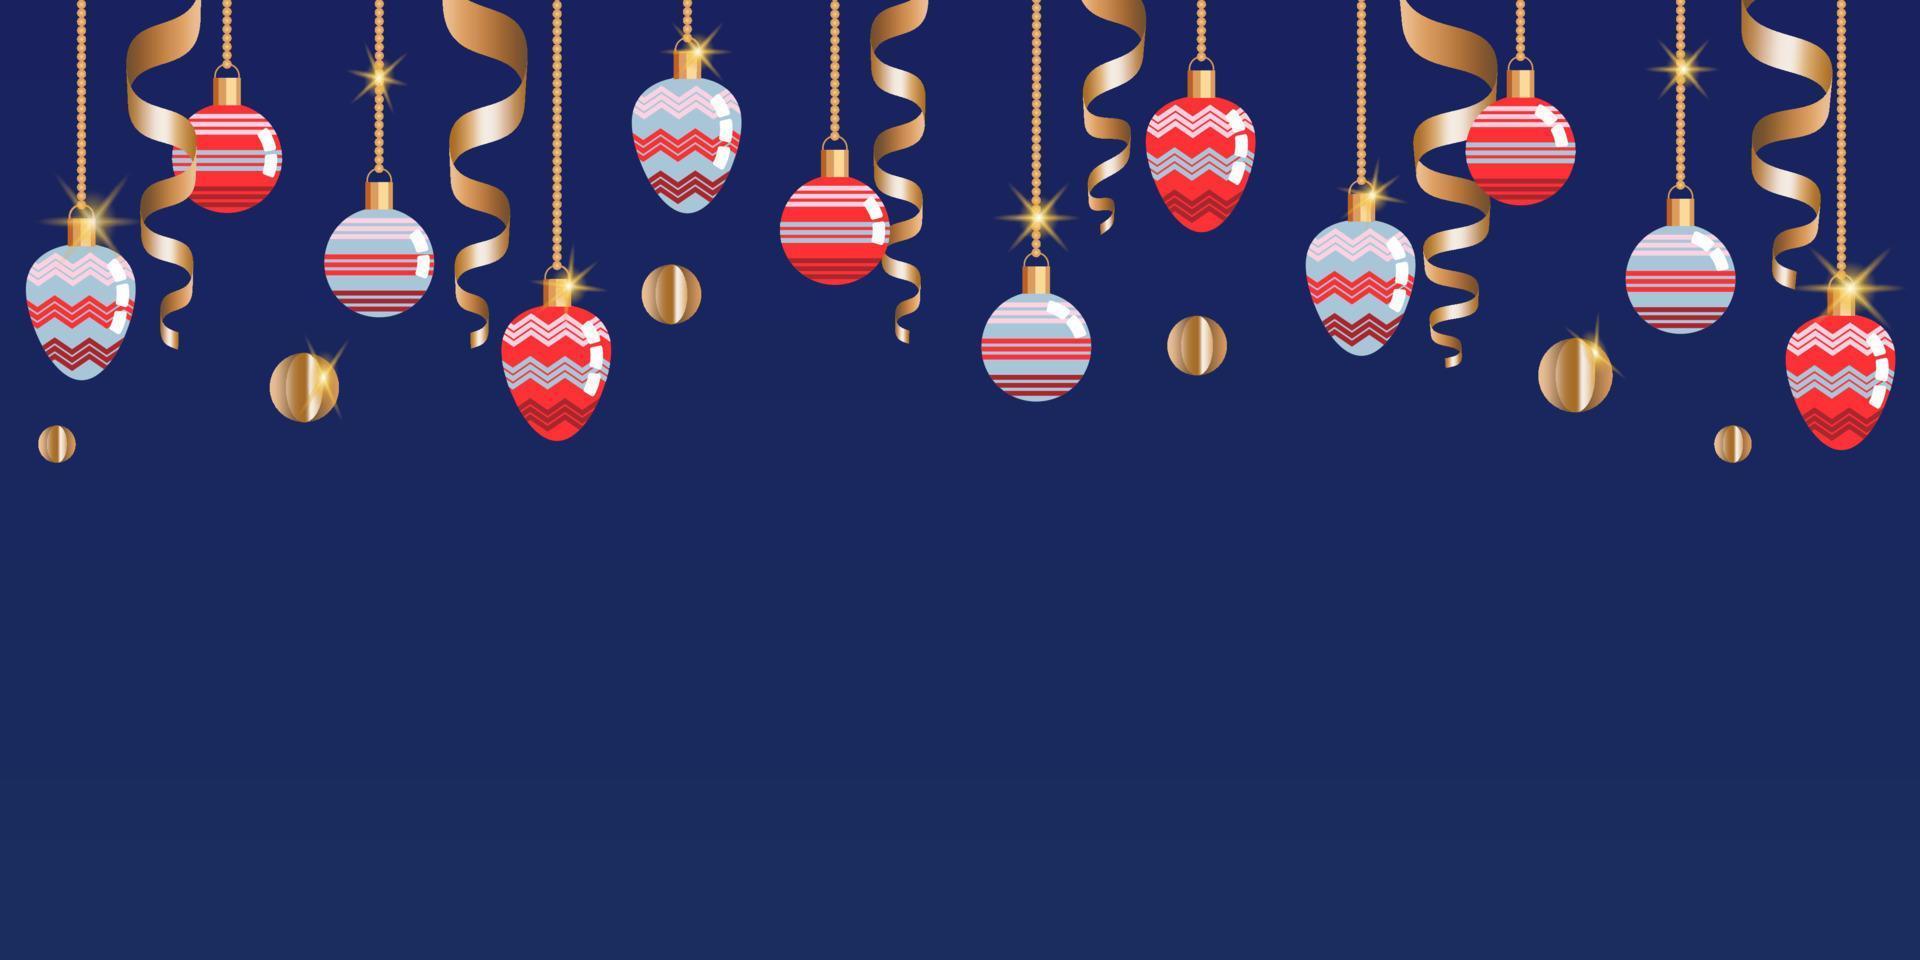 Hanging Christmas baubles with gold chain and ribbons on blue background. Festive banner, poster. Vector illustration.